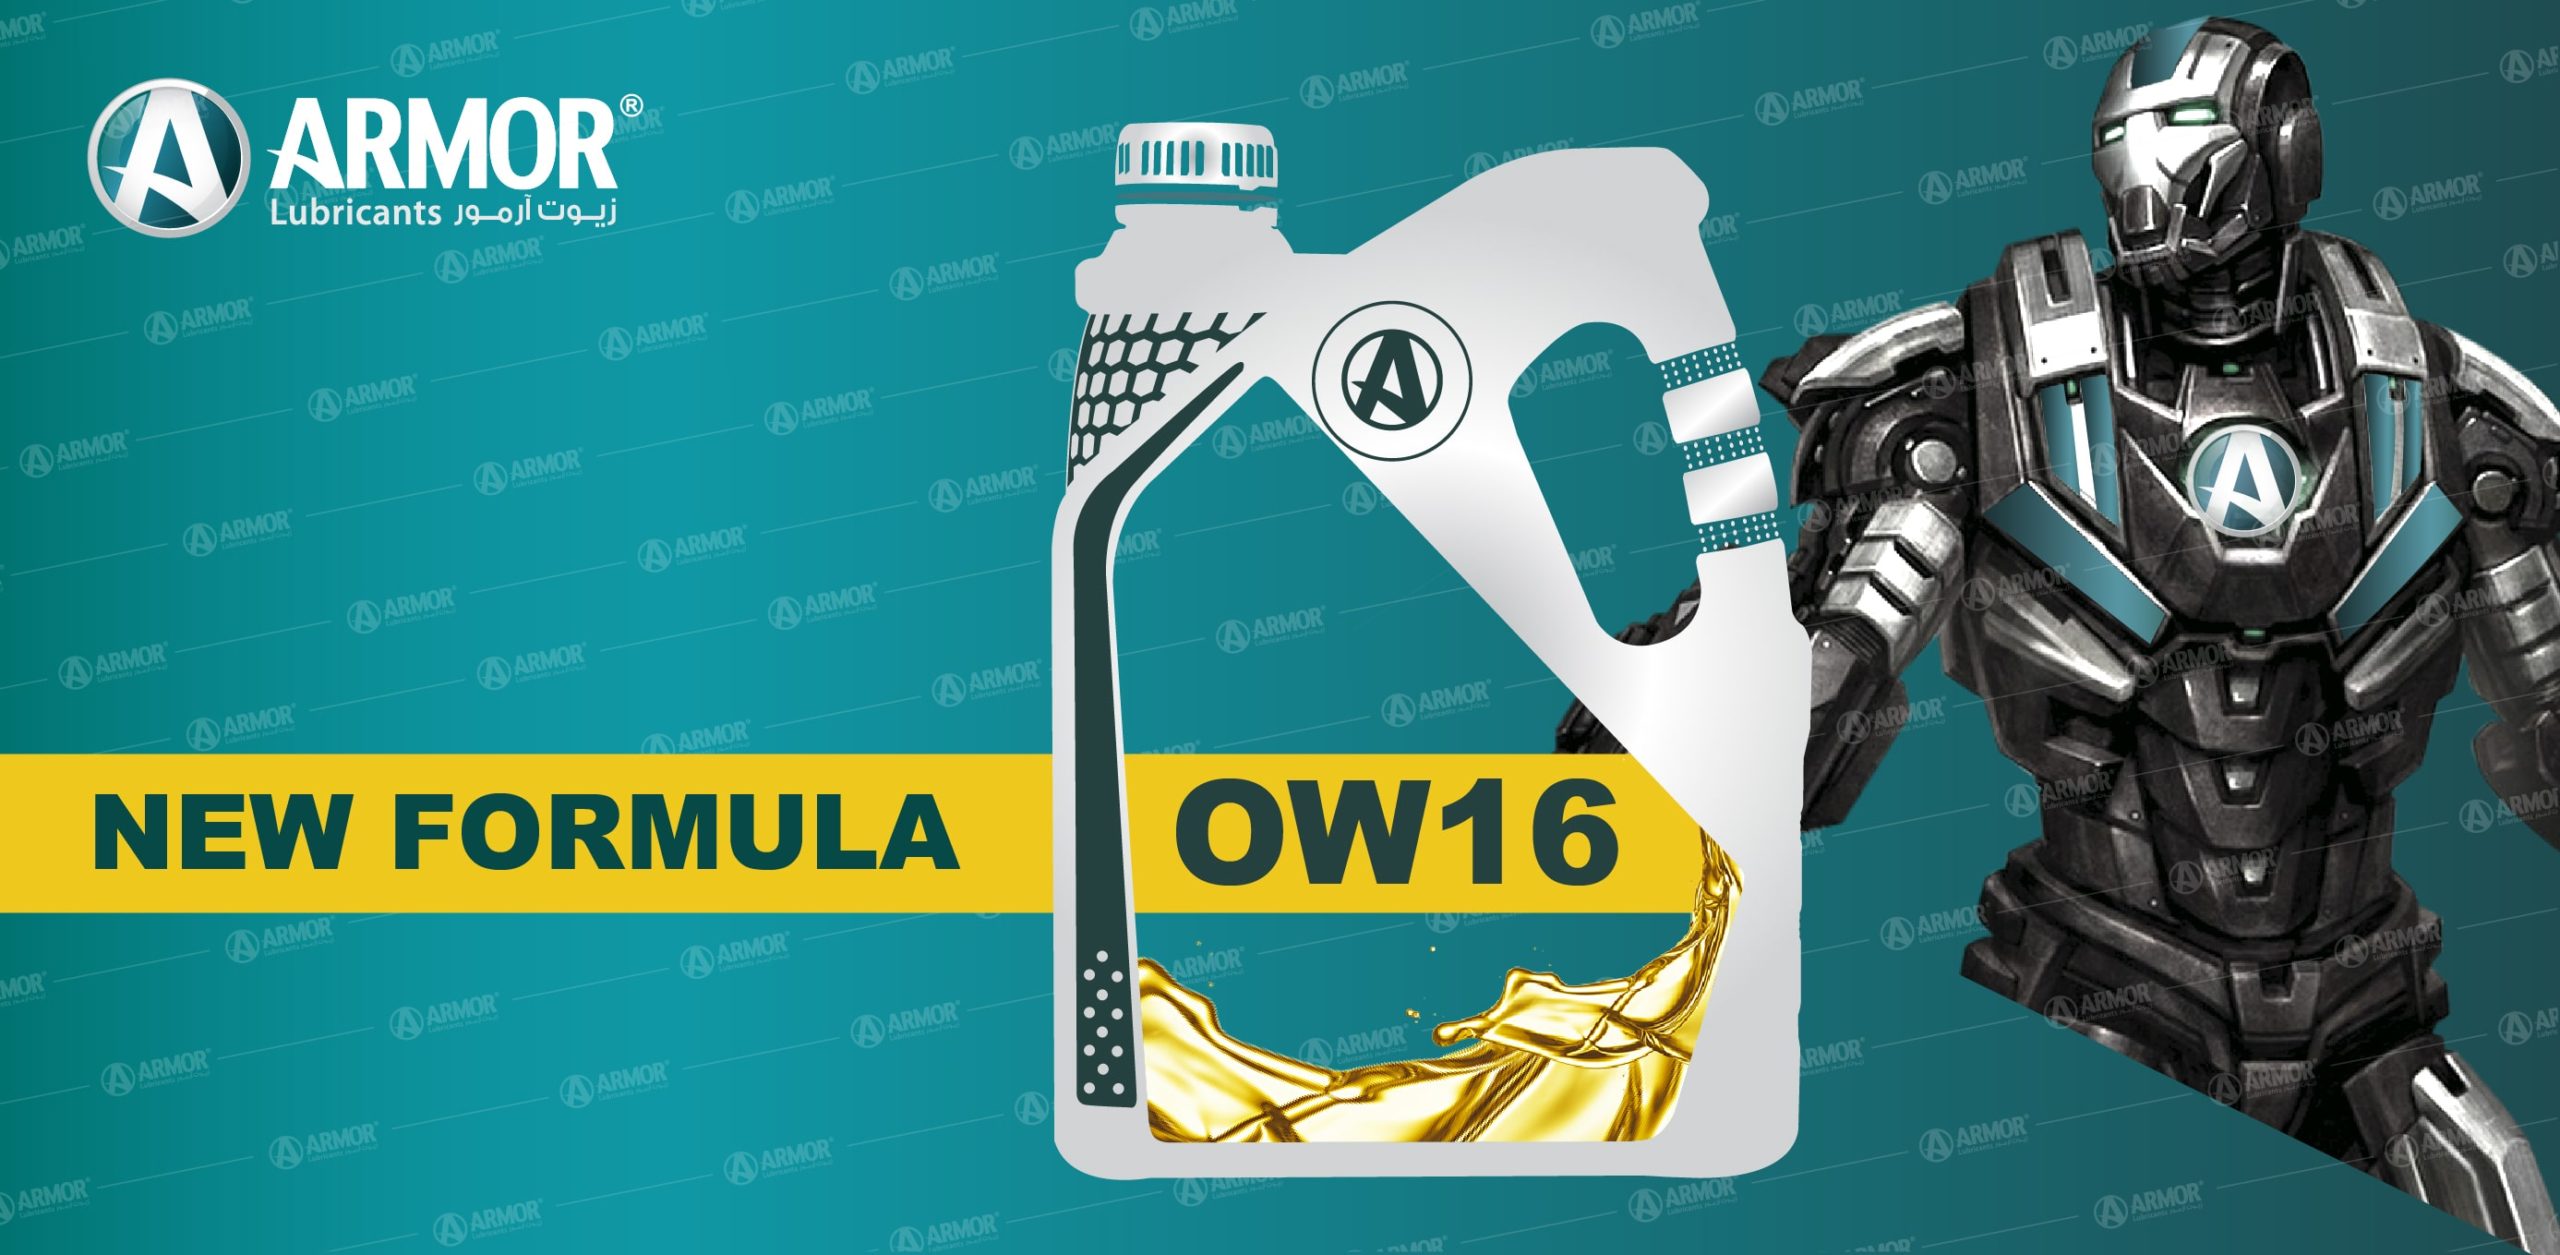 A Closer Look At The New SAE 0W16 Engine Oil